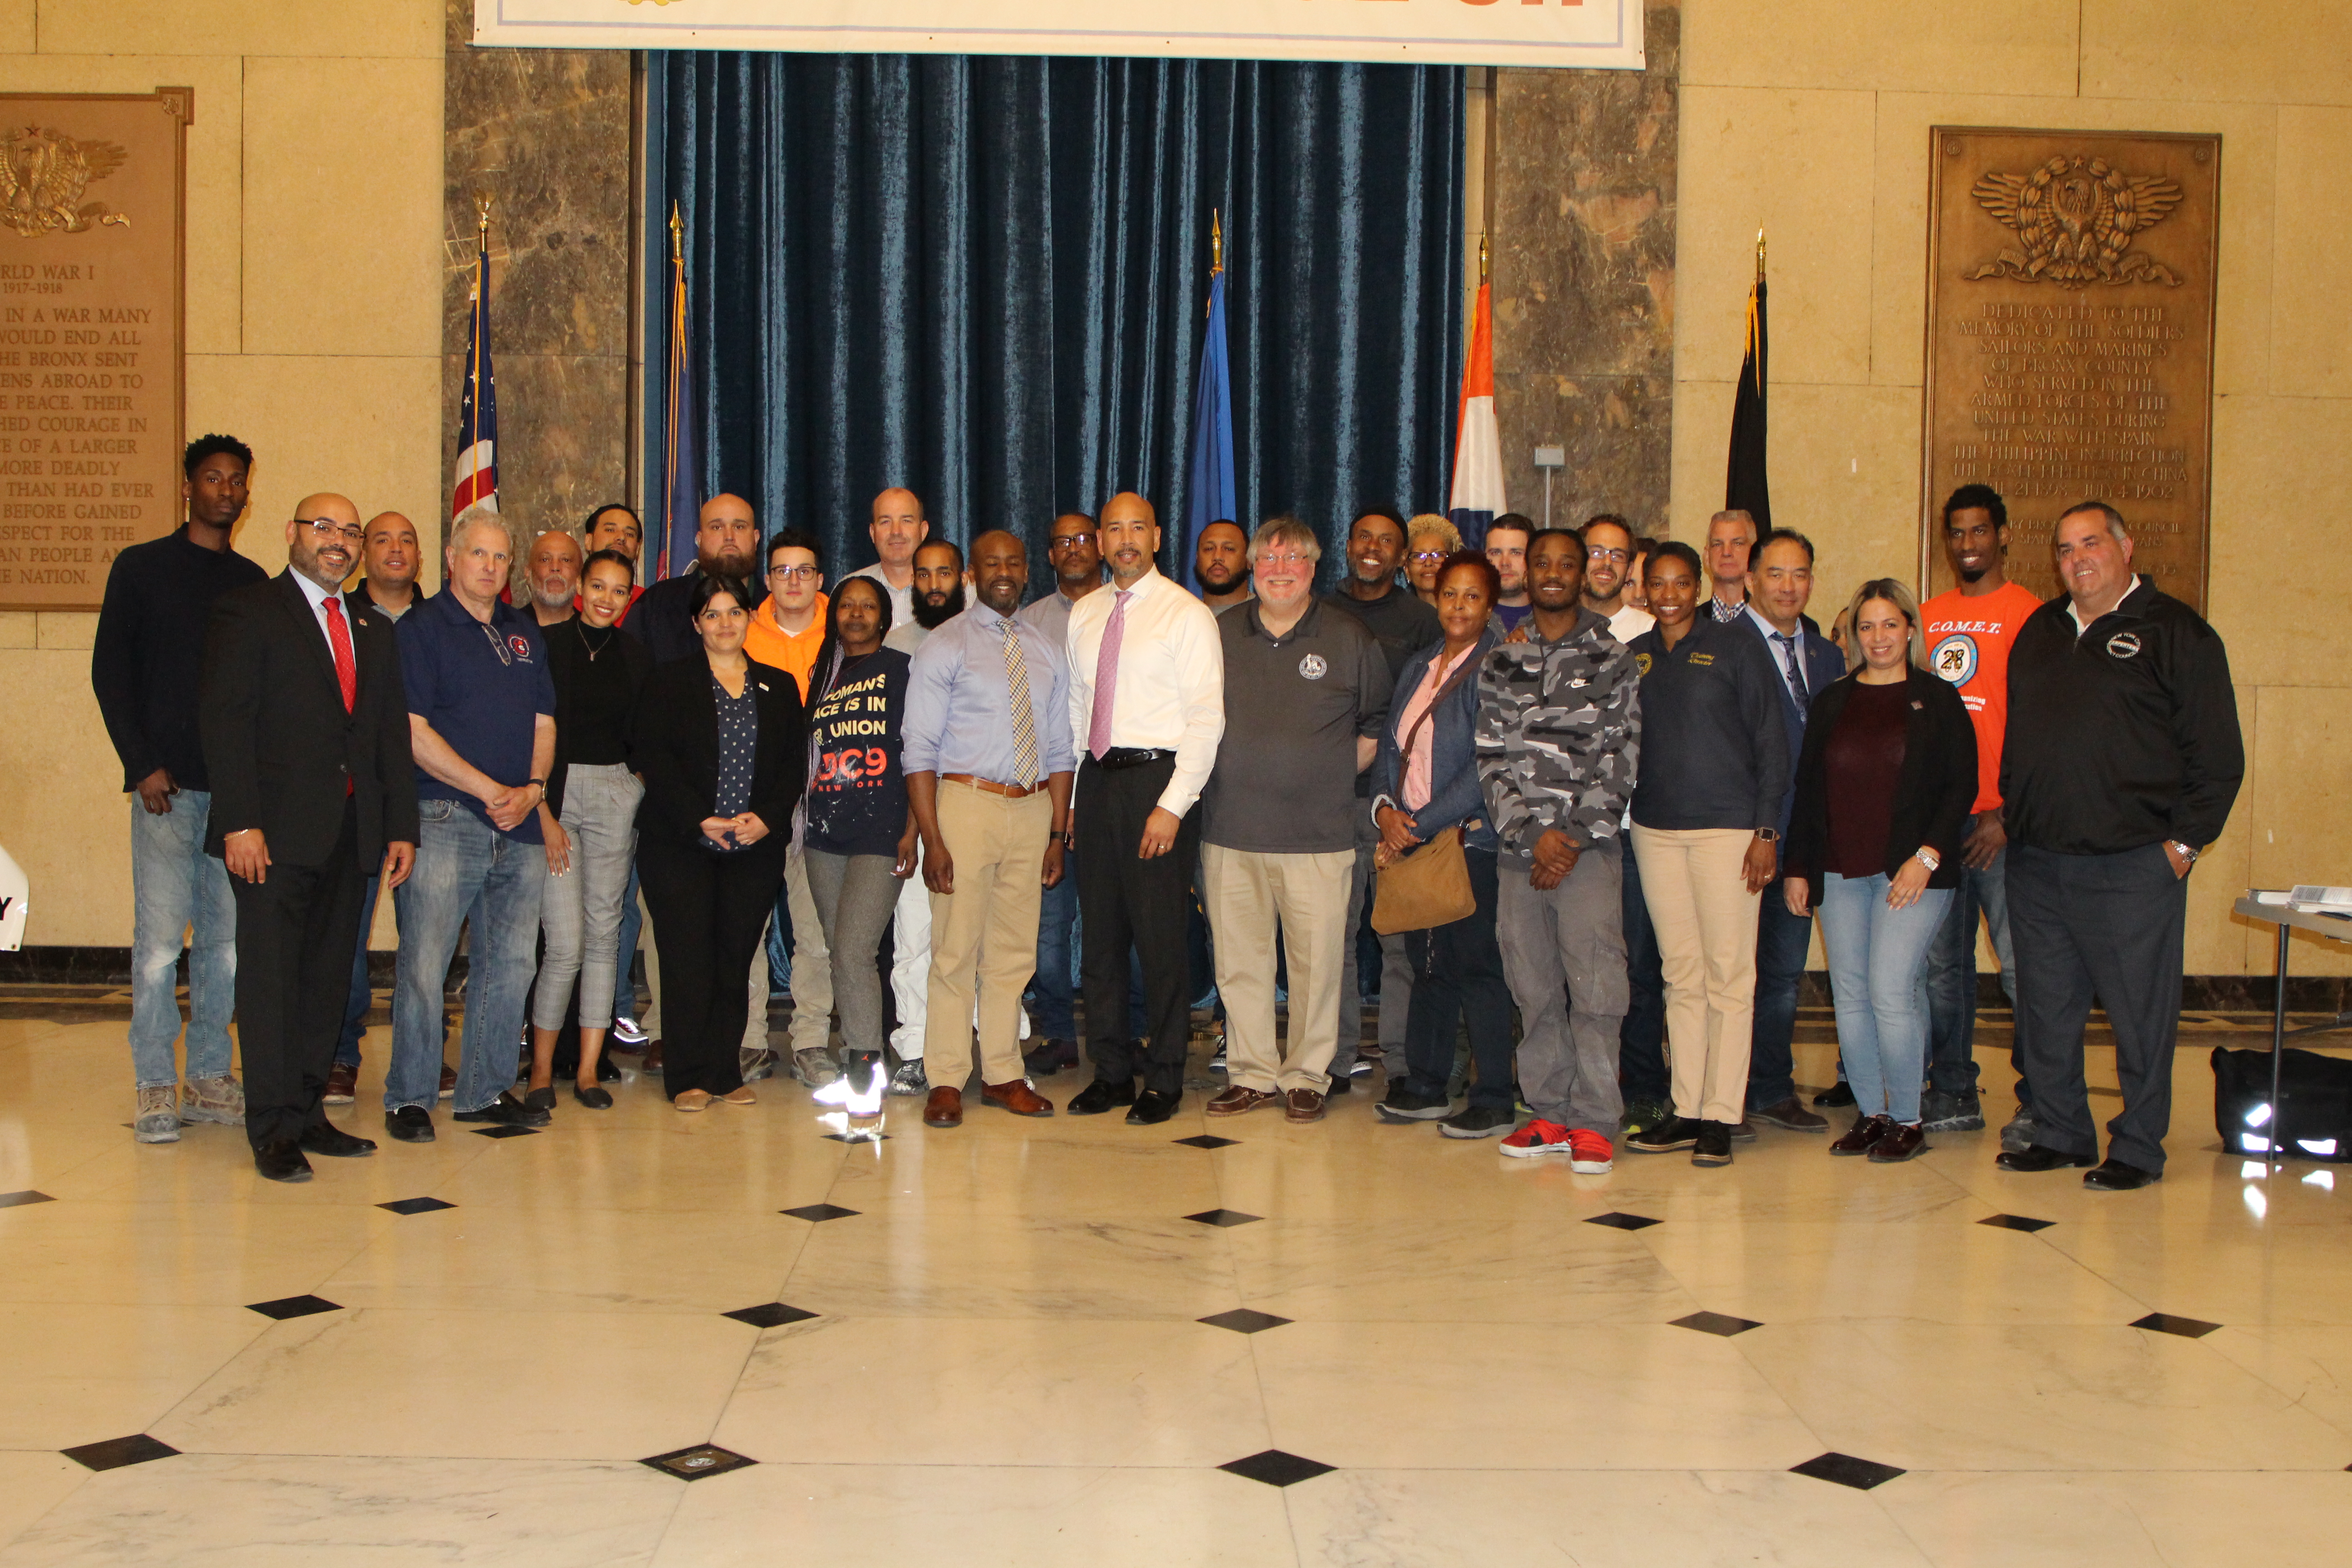 “Construction Career Information Session” Held In Bronx